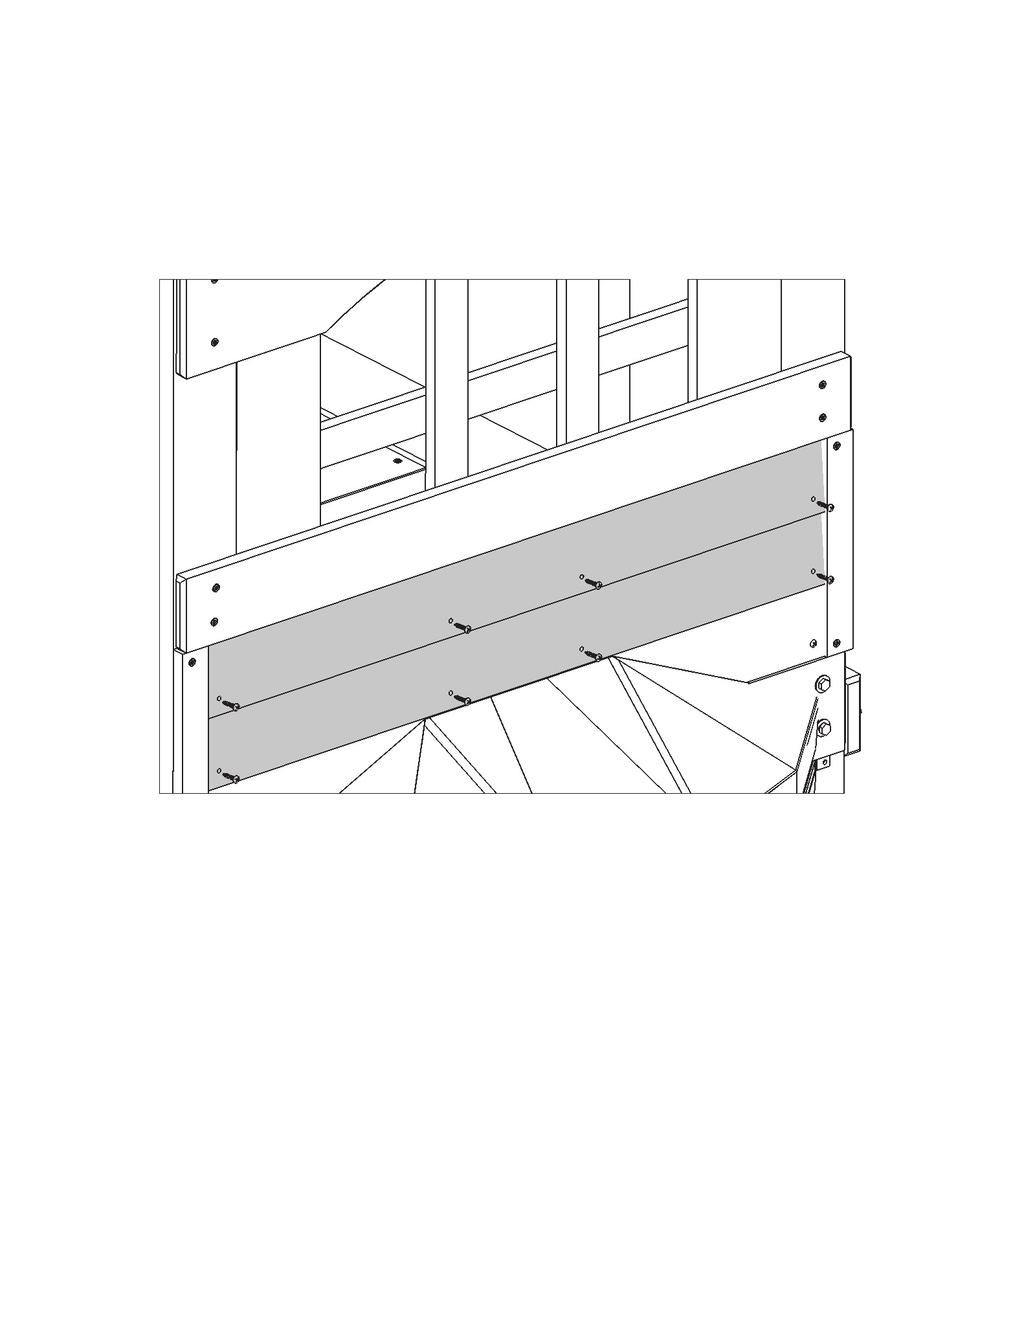 Step 23: Window Wall Assembly Part 4 L: Install 2 more (1929) Siding directly above the first, attaching to both () Posts and both (1866) Window Uprights with 4 (S0) #8 x 7/8